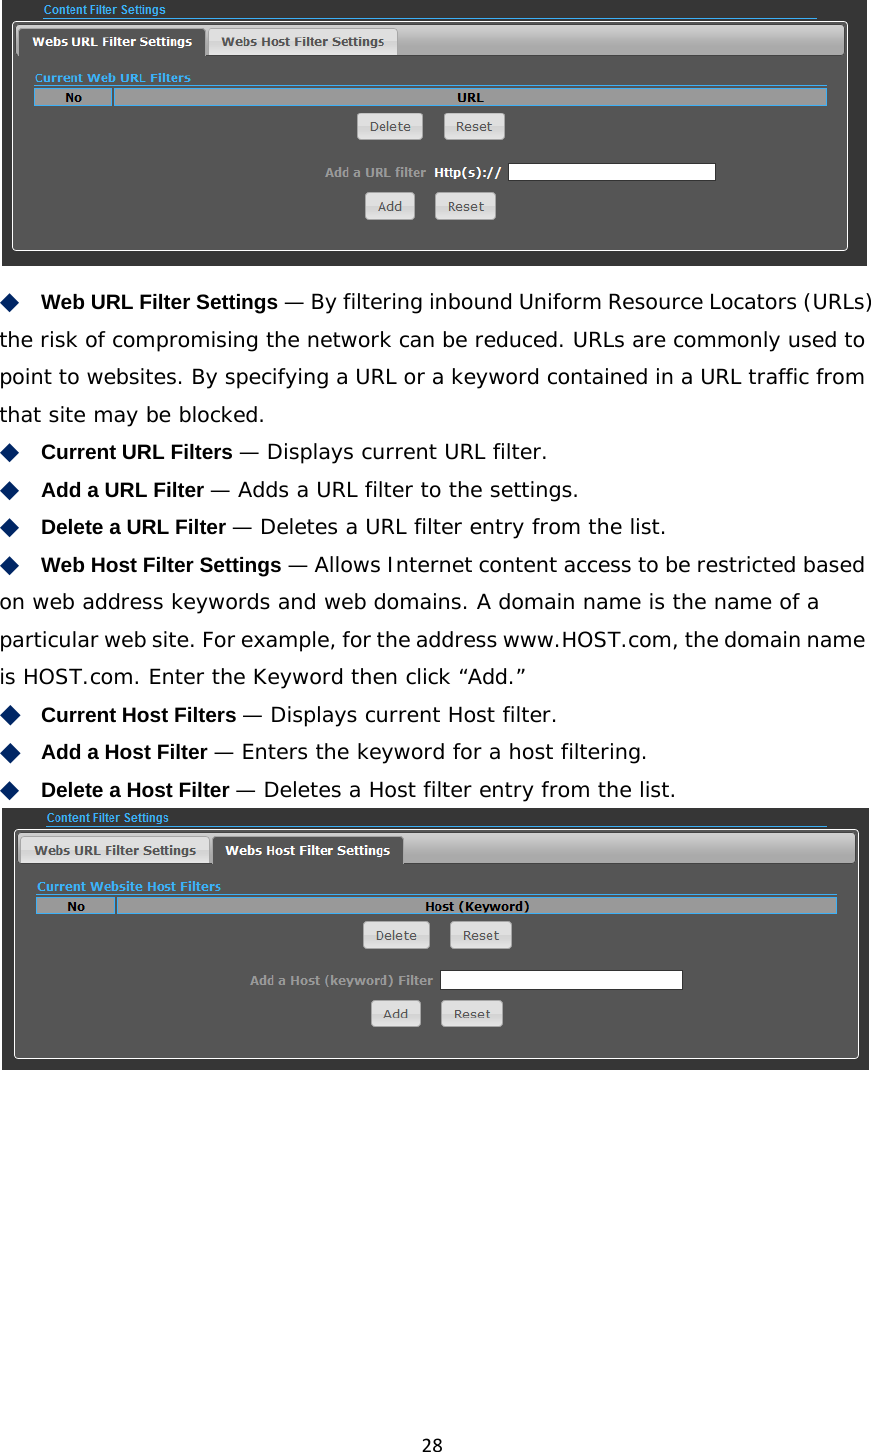 28 ◆　Web URL Filter Settings — By filtering inbound Uniform Resource Locators (URLs) the risk of compromising the network can be reduced. URLs are commonly used to point to websites. By specifying a URL or a keyword contained in a URL traffic from that site may be blocked. ◆　Current URL Filters — Displays current URL filter. ◆　Add a URL Filter — Adds a URL filter to the settings. ◆　Delete a URL Filter — Deletes a URL filter entry from the list. ◆　Web Host Filter Settings — Allows Internet content access to be restricted based on web address keywords and web domains. A domain name is the name of a particular web site. For example, for the address www.HOST.com, the domain name is HOST.com. Enter the Keyword then click “Add.” ◆　Current Host Filters — Displays current Host filter. ◆　Add a Host Filter — Enters the keyword for a host filtering. ◆　Delete a Host Filter — Deletes a Host filter entry from the list.     